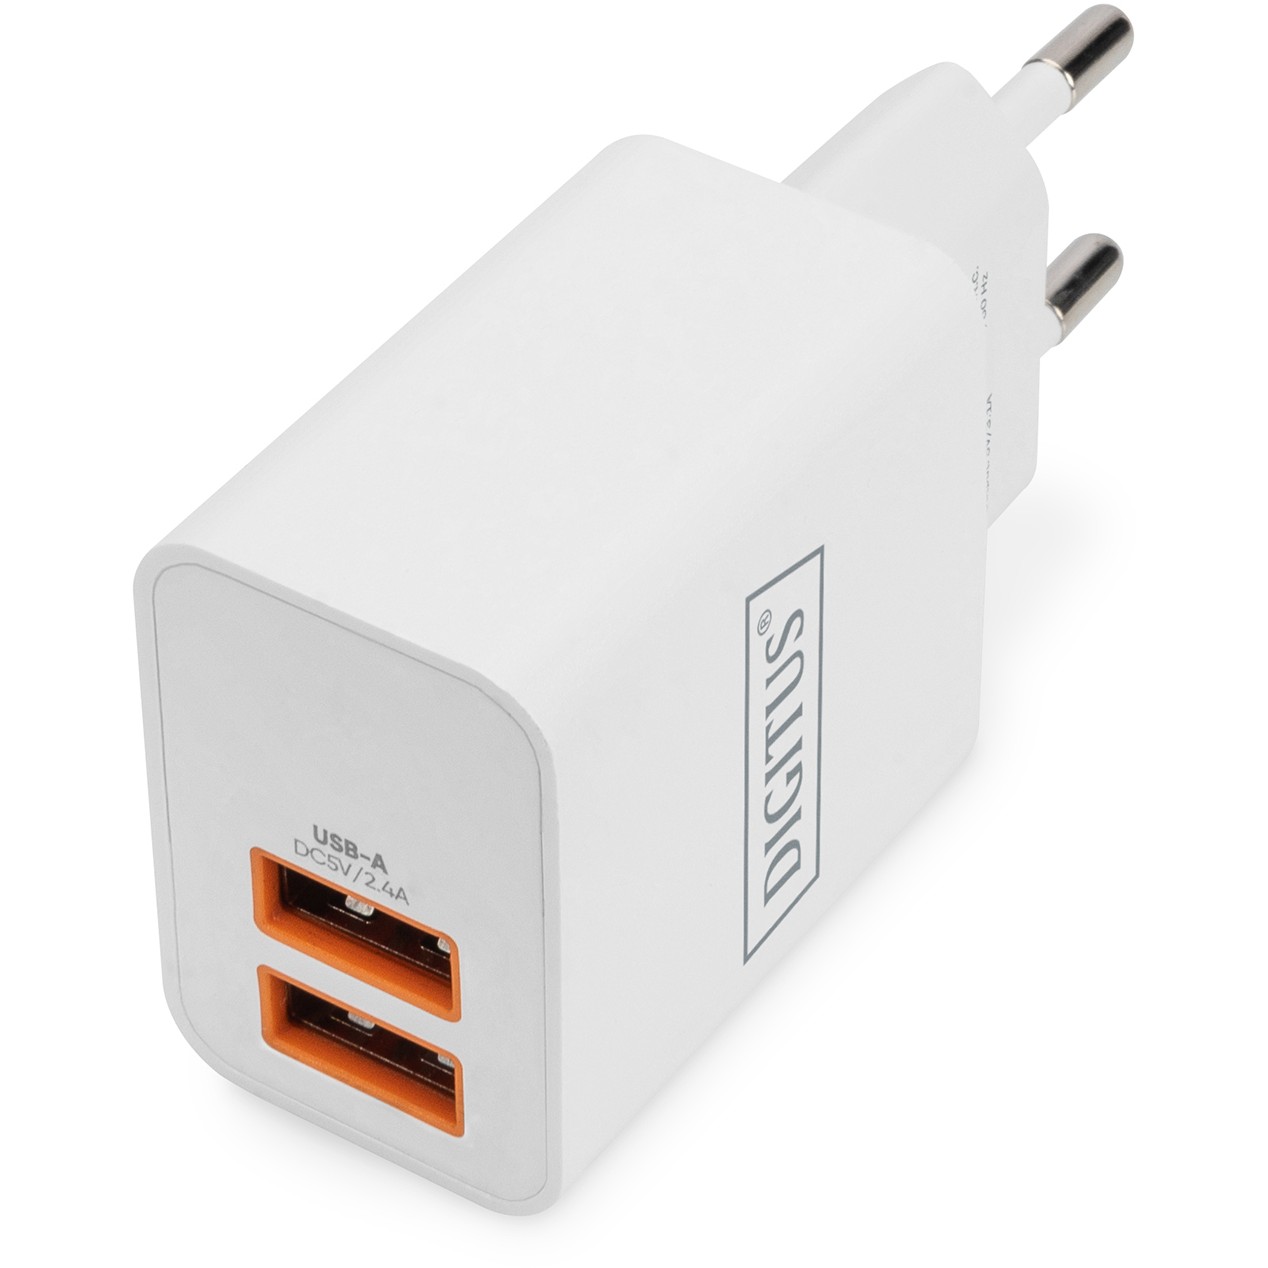 Charger 2xUSB-A 15,5W Digitus White